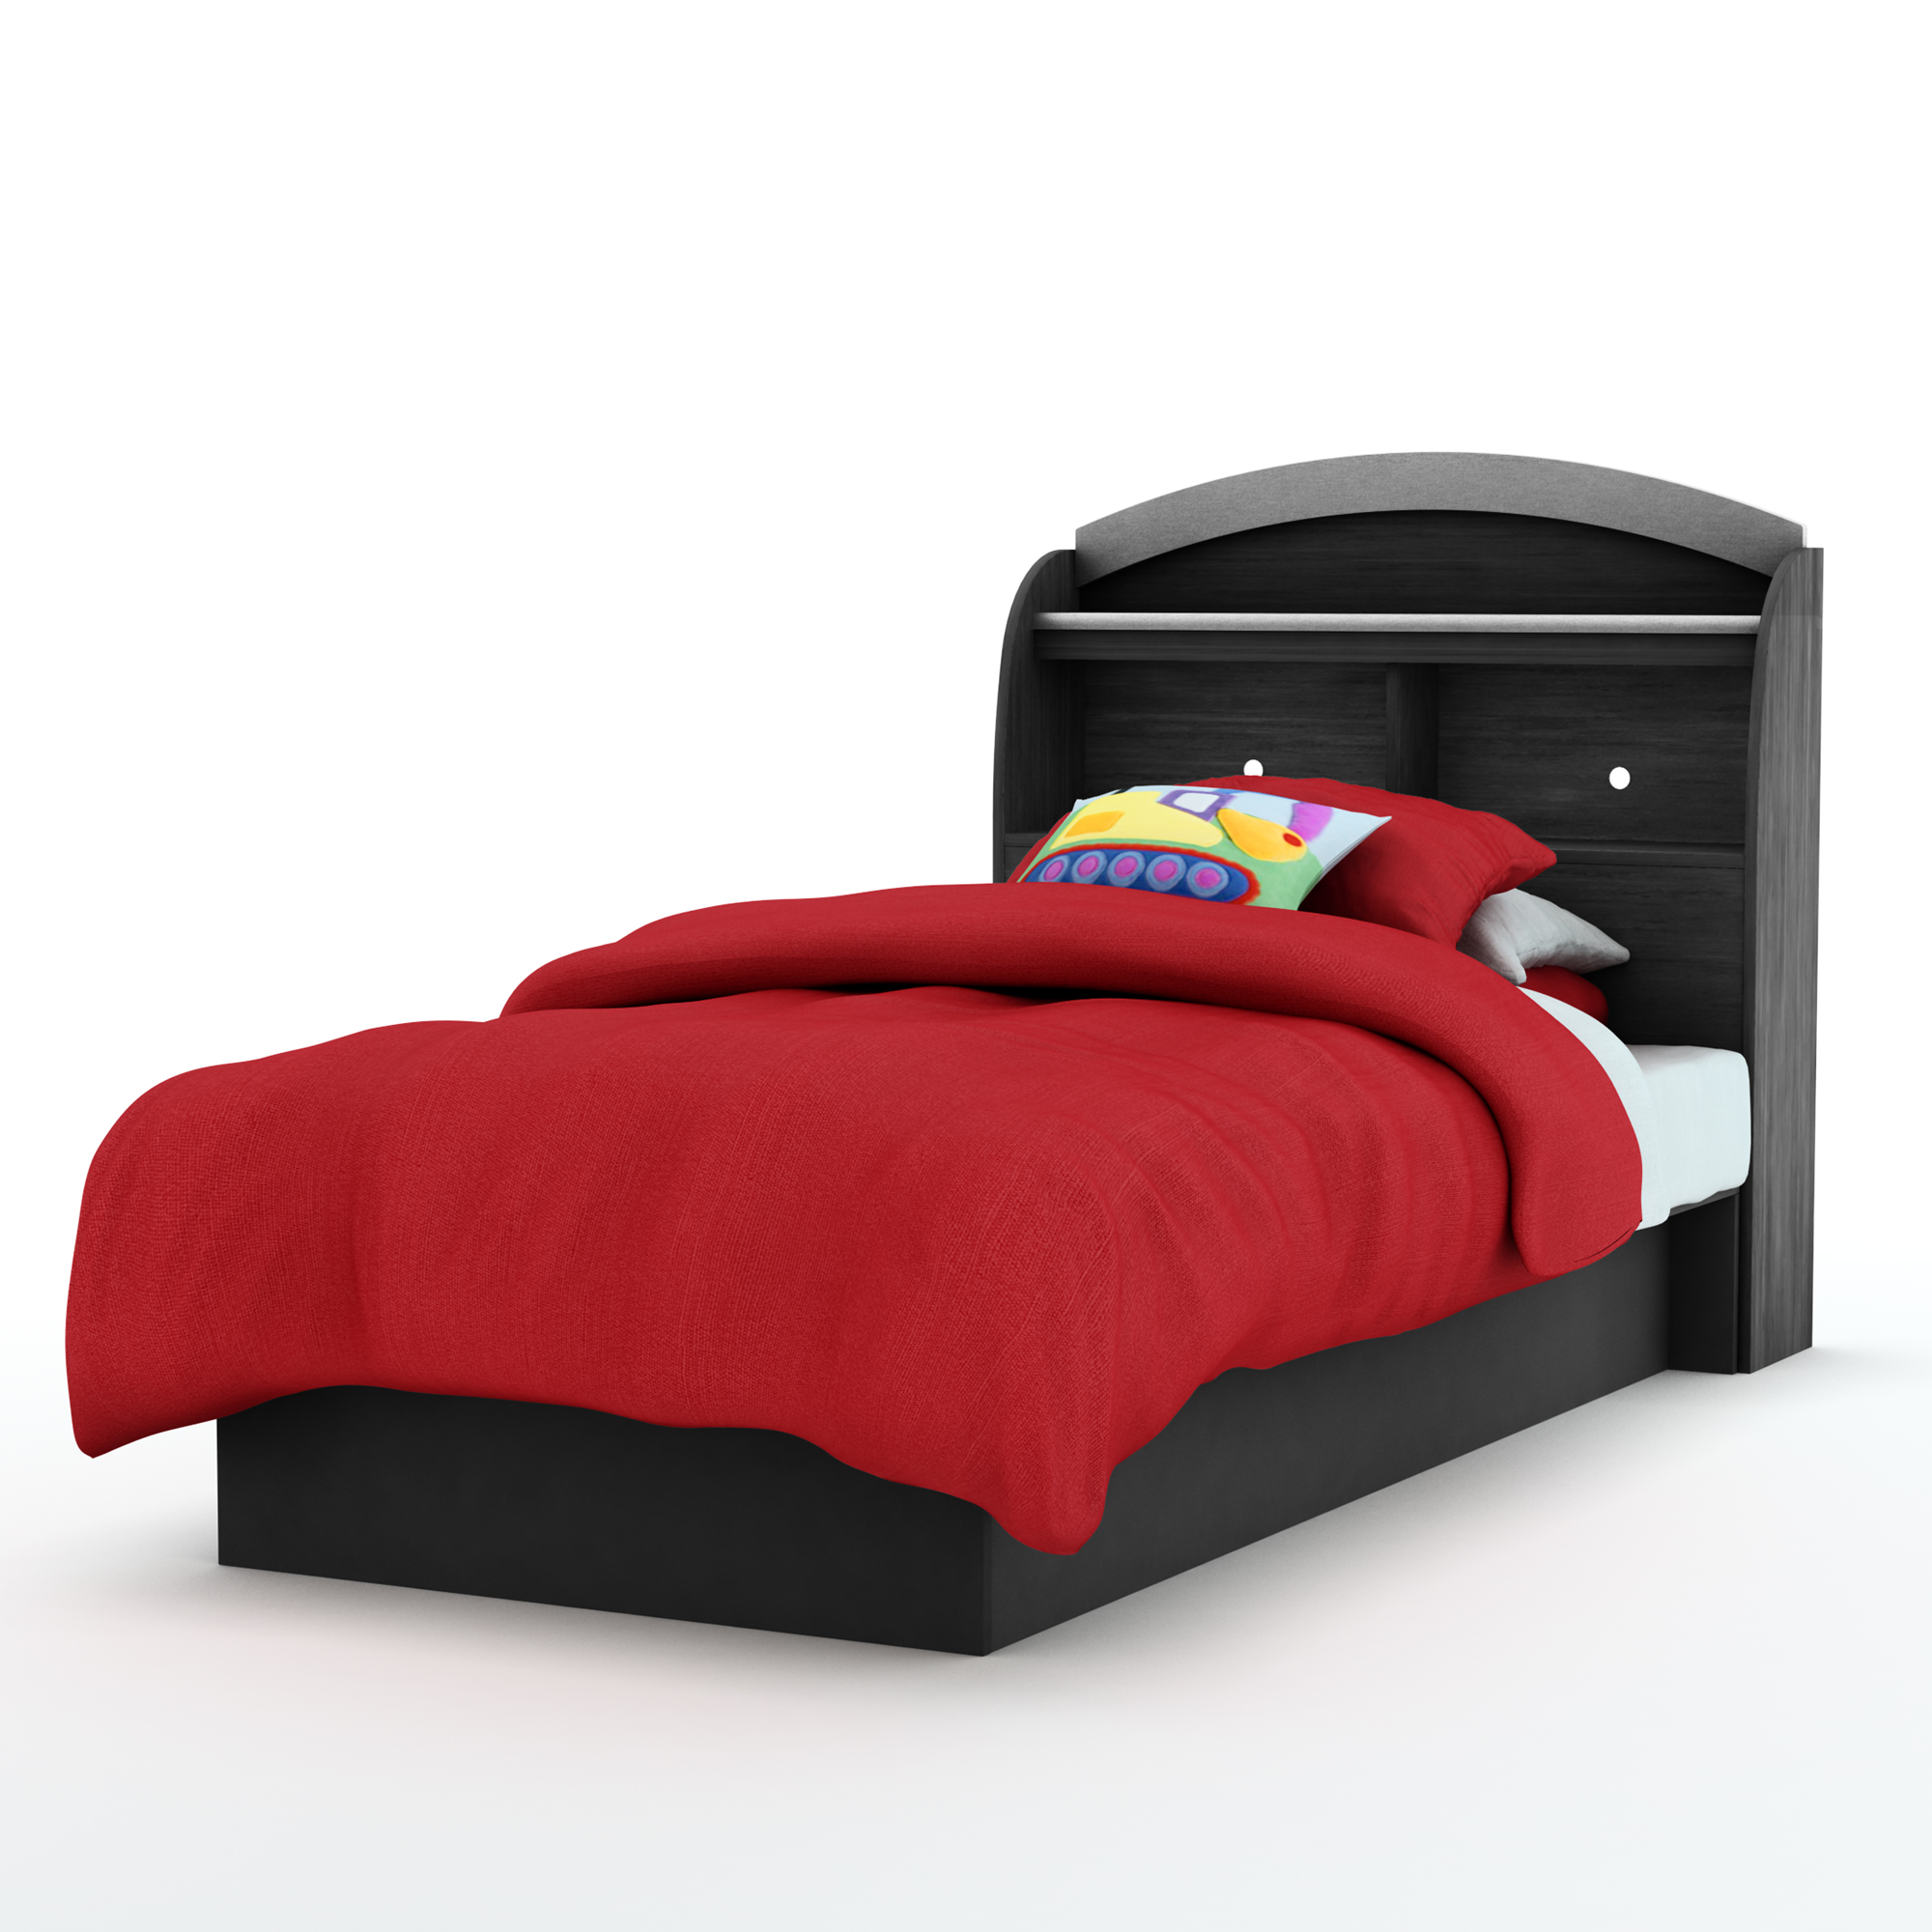 South Shore Libra Kid's Twin Platform Bed in Pure Black Finish - image 4 of 10